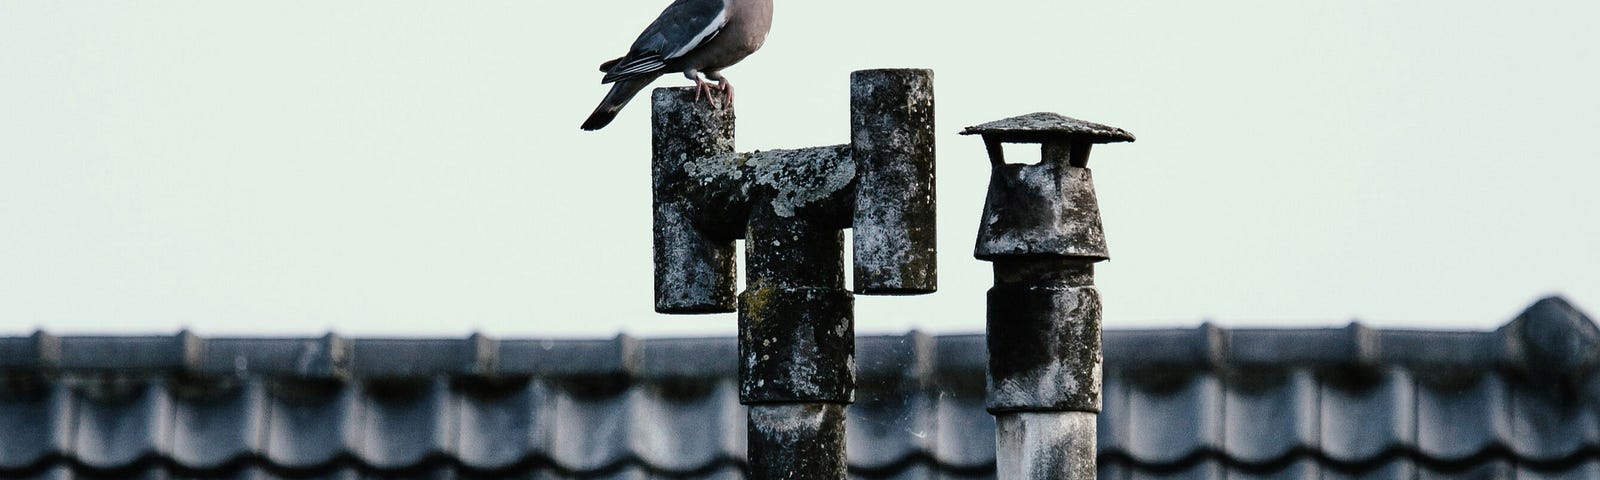 A pigeon sits atop a pole in front of a grey roof